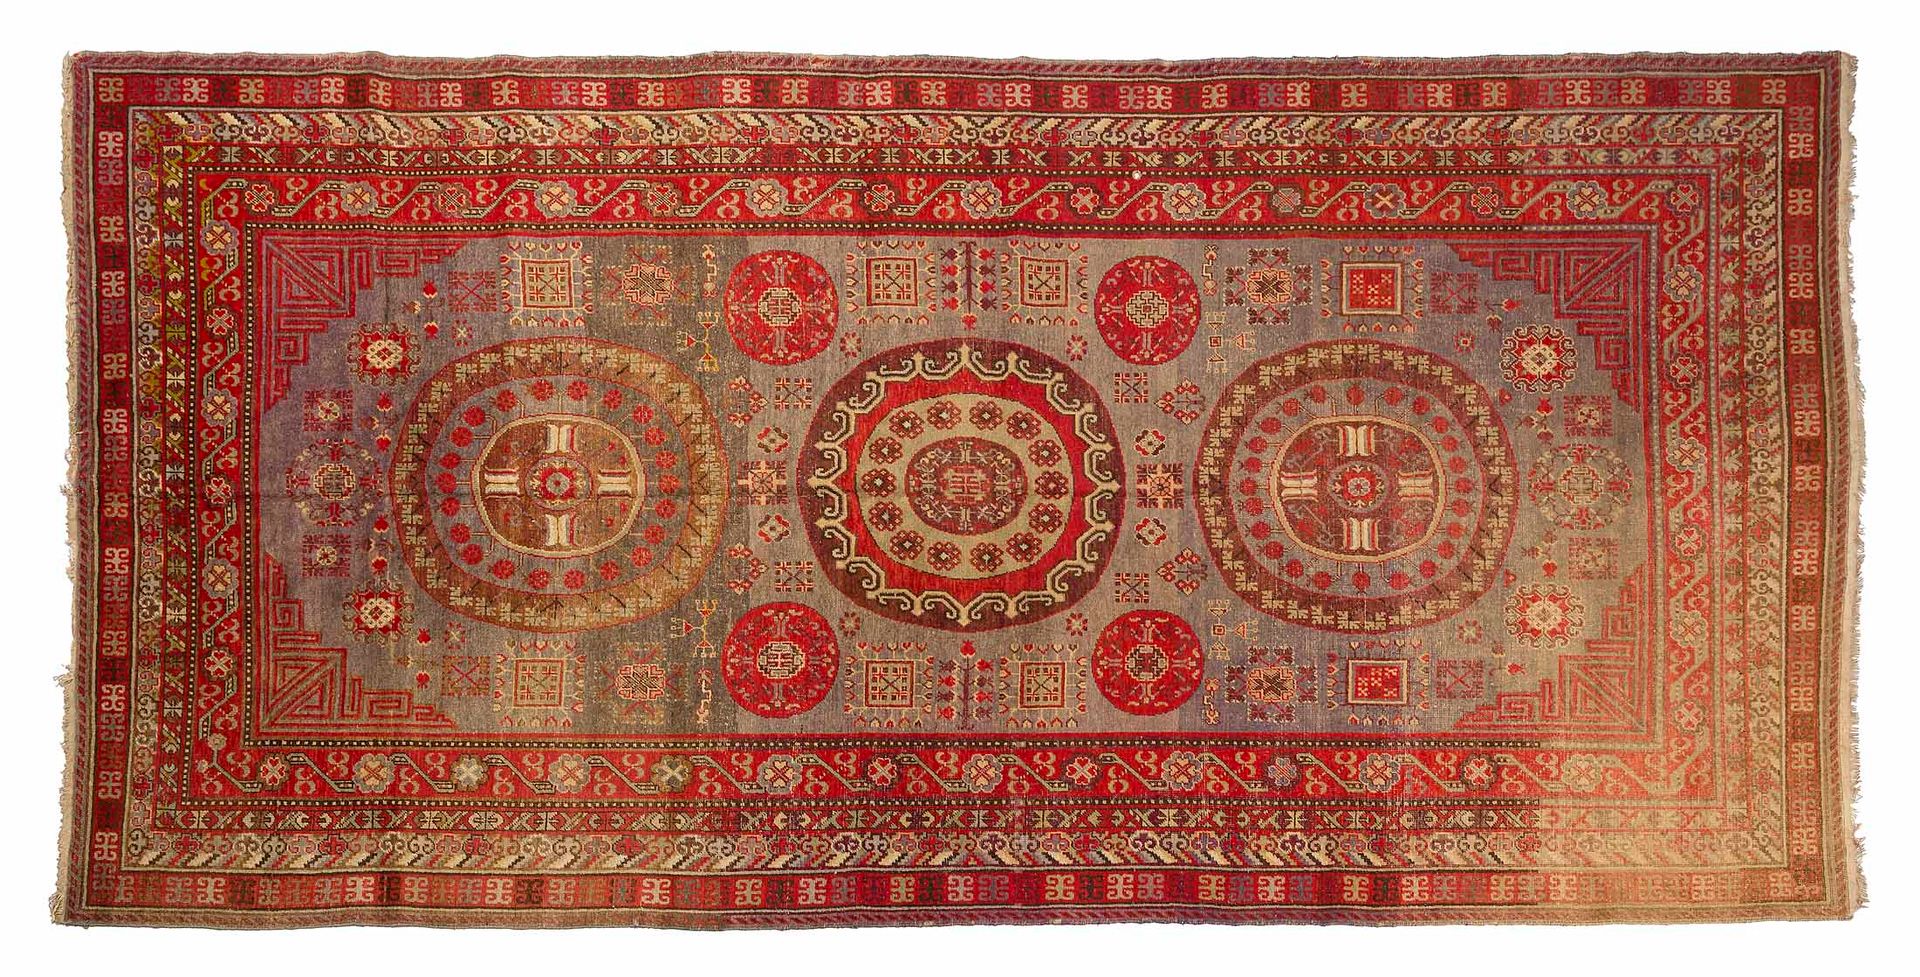 Null SAMARKANDE carpet (Central Asia), end of the 19th century

Dimensions : 410&hellip;